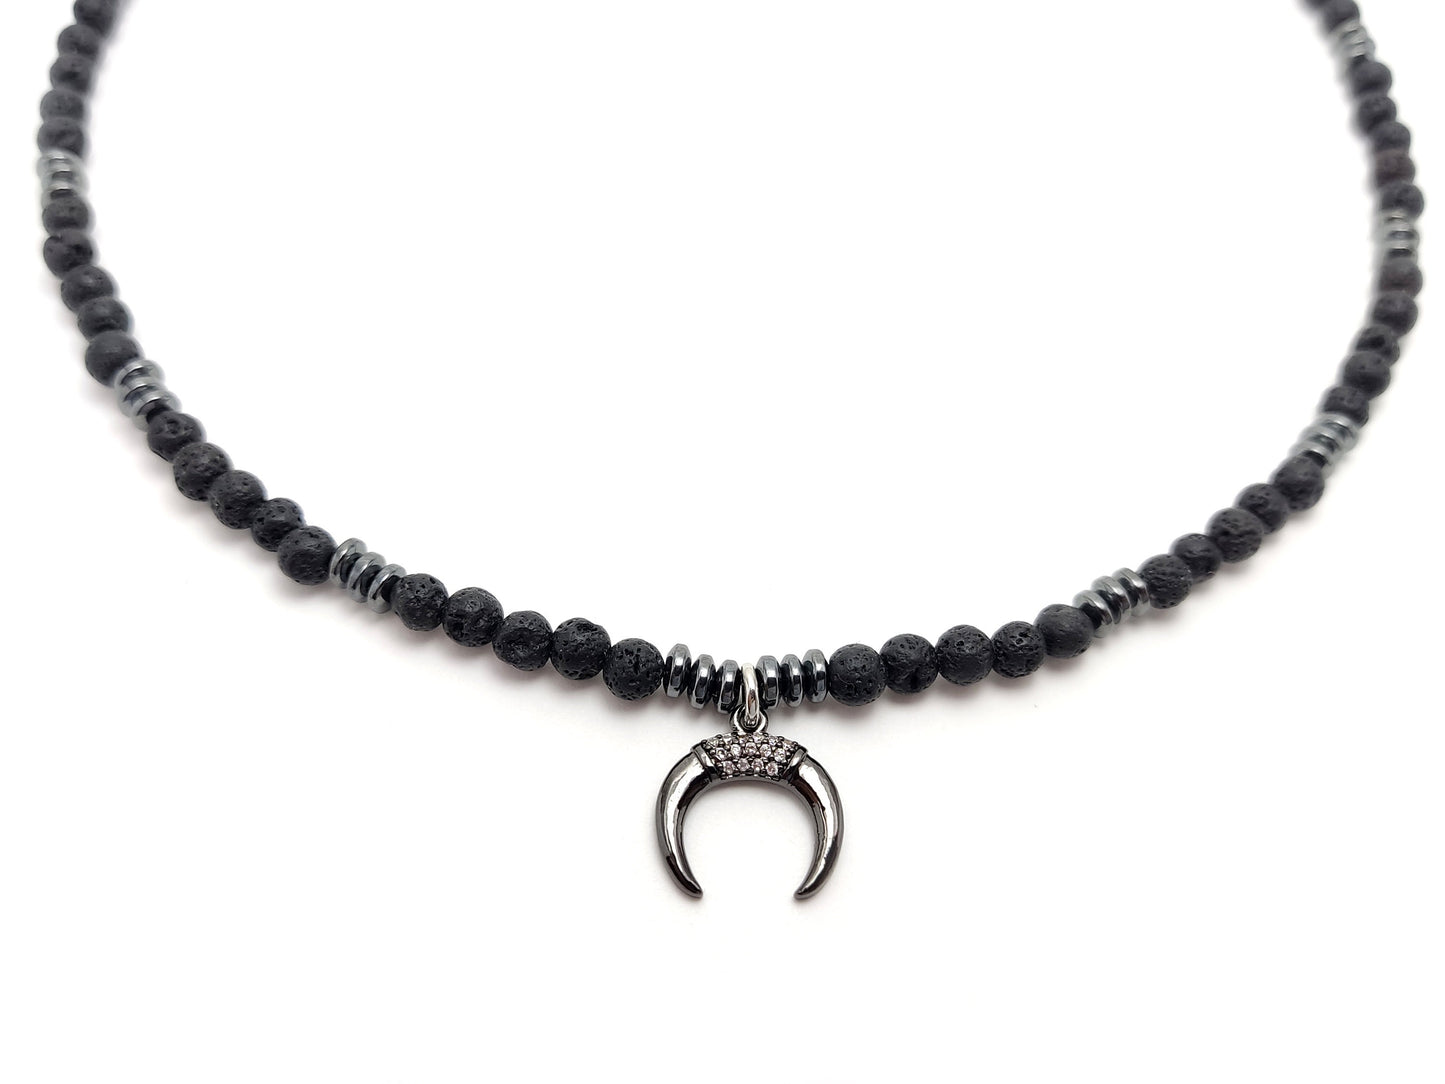 Volcanic Lava Greek Necklace Horns Pendant, Mens Womens Unisex Jewelry From Greece, Trendy Fashion Black Stones Good Luck Necklaces, Lava